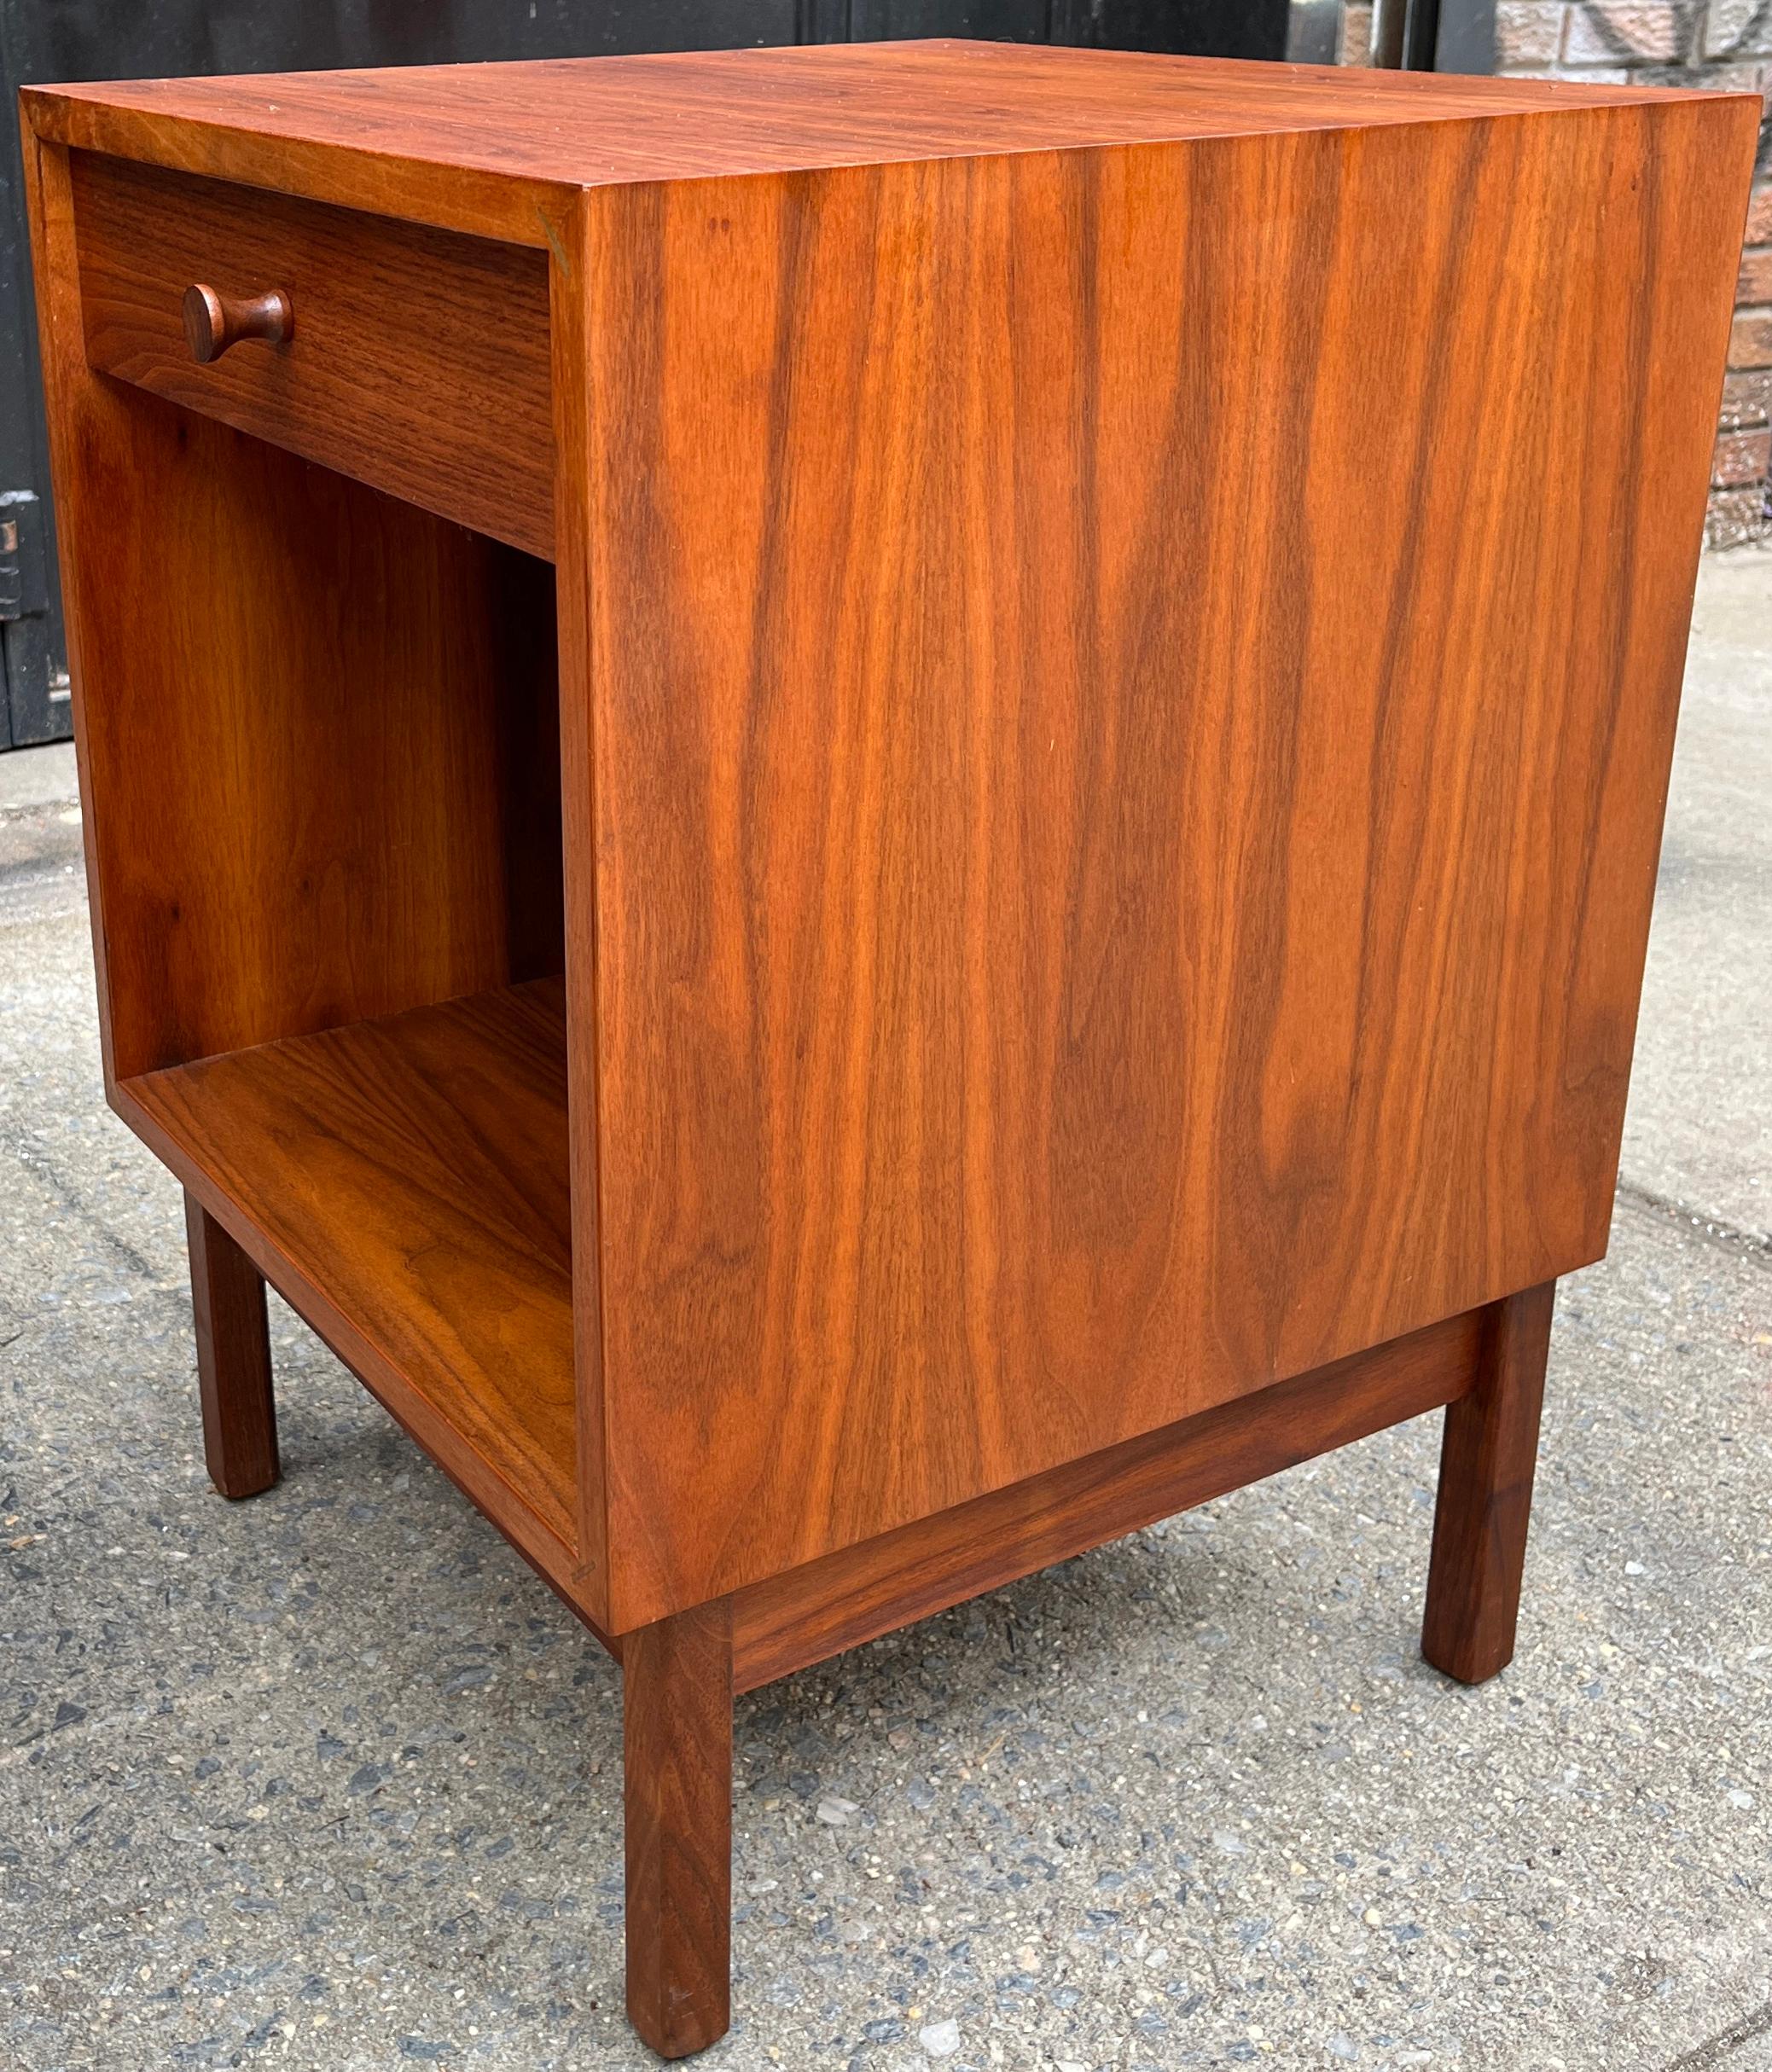 Richard Artschwager (NY 1923-2013). Fine and exceedingly rare nightstand cabinets in walnut. Featuring one night stand with door and drawer and another with a single drawer. Artschwager started his career designing and making furniture. He had a